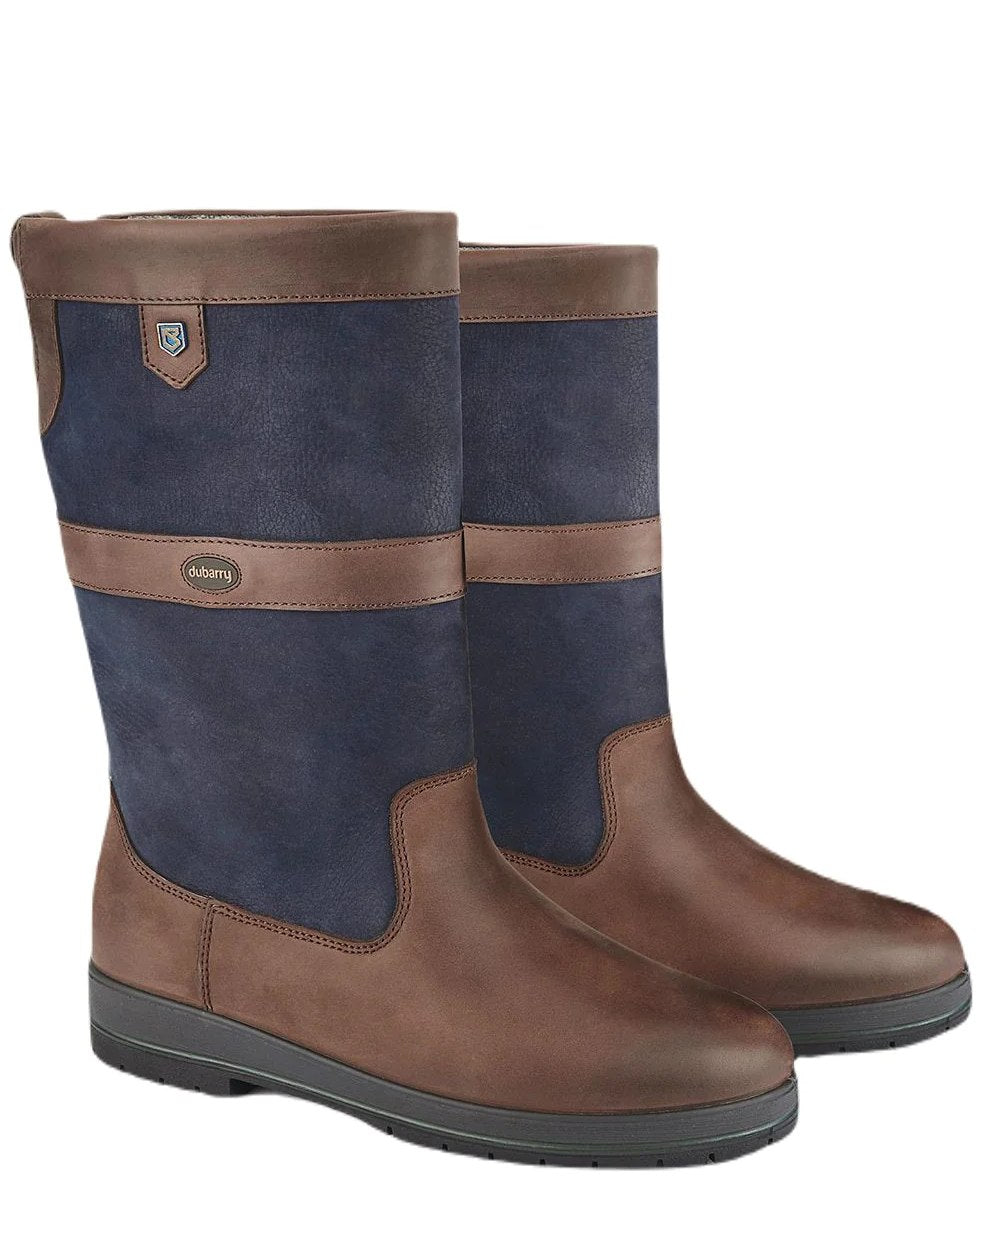 Dubarry Kildare Country Boots